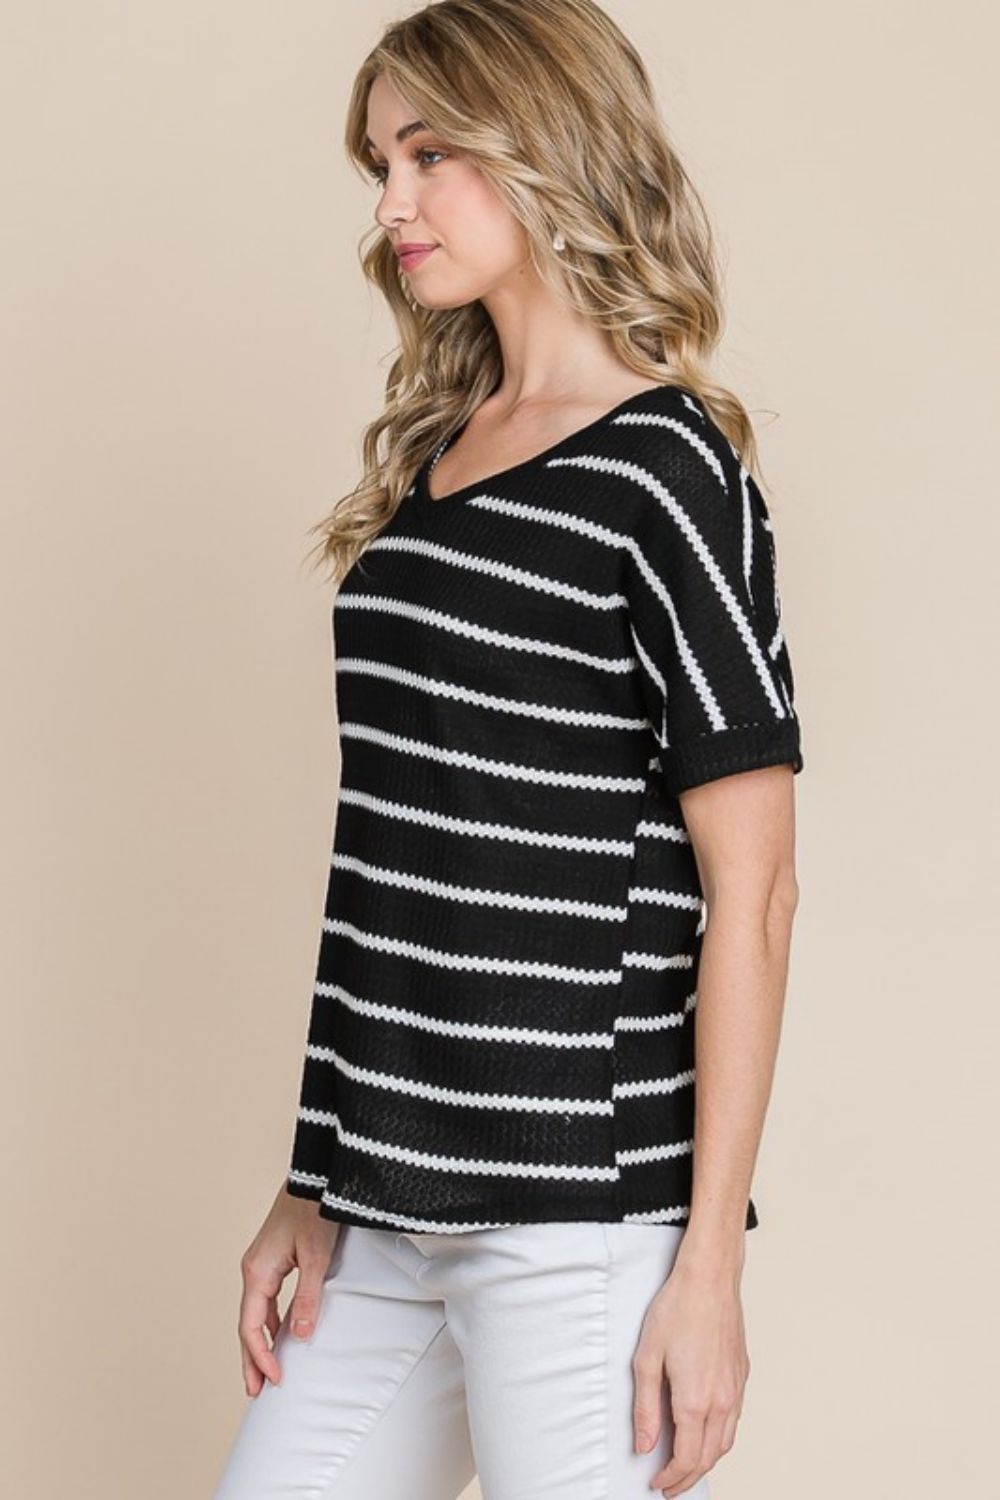 Simple Goals Waffle Knit Striped Tee in Black (MADE IN USA)